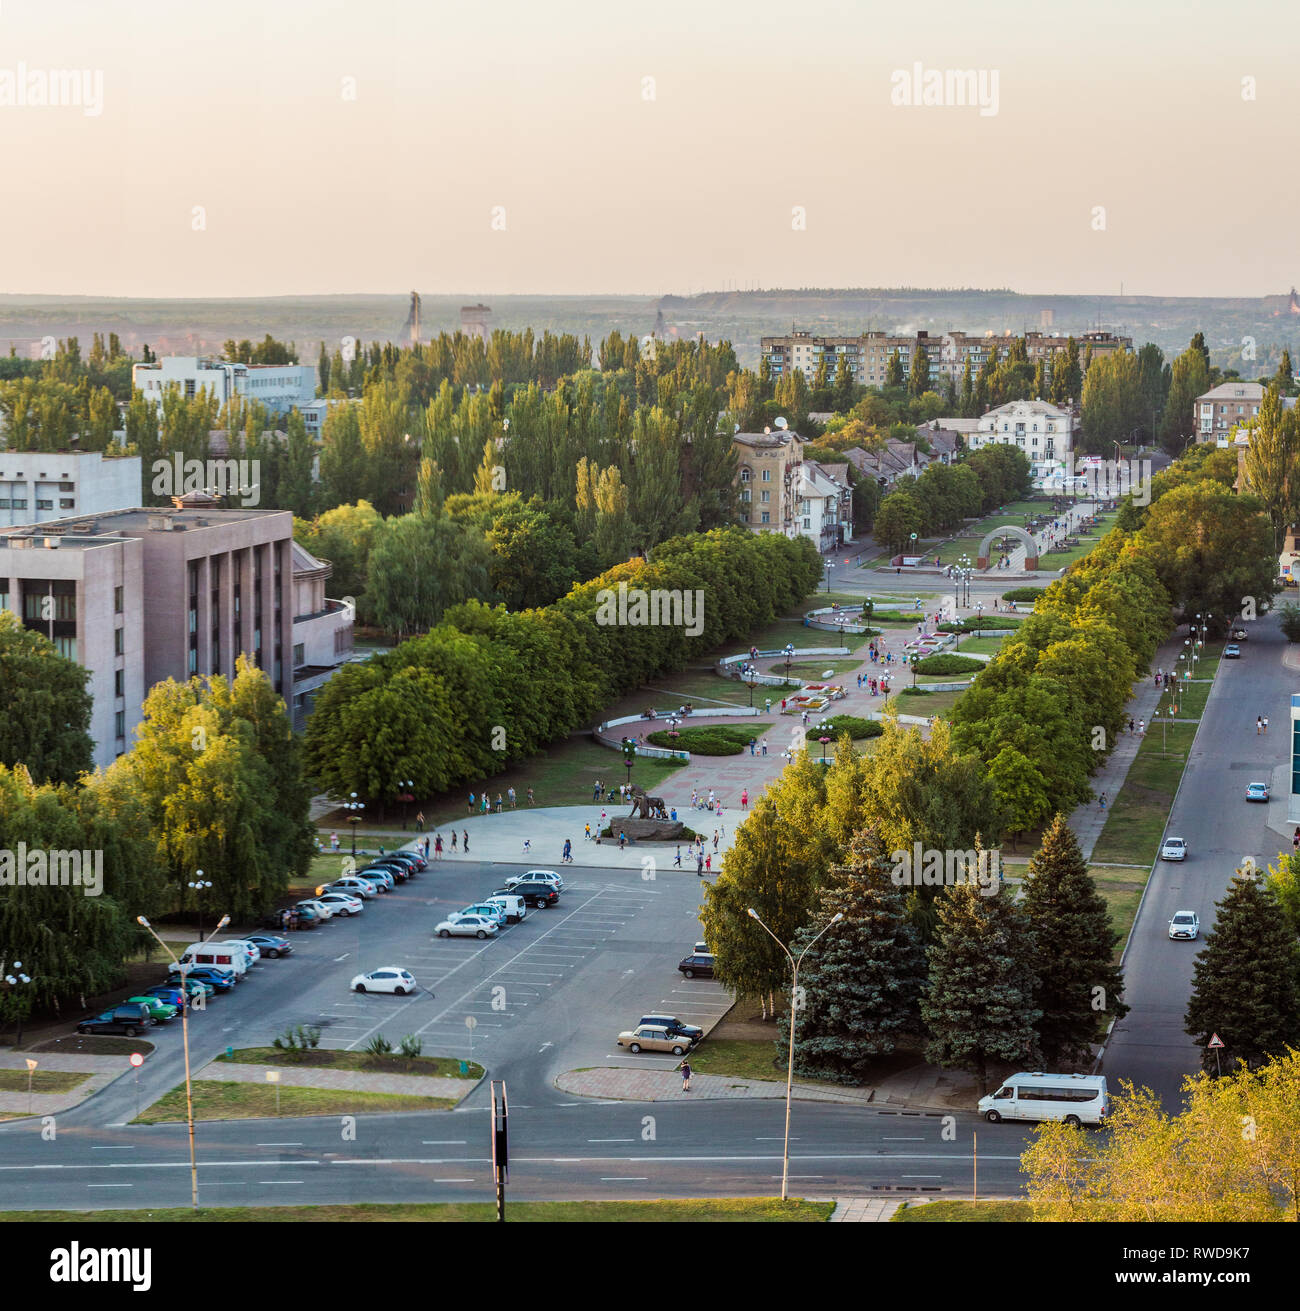 A Kriviy Rih city view. Cityscape at the sunset. A square with chestnut trees alley. City council building. Ukraine. View from the roof. Stock Photo